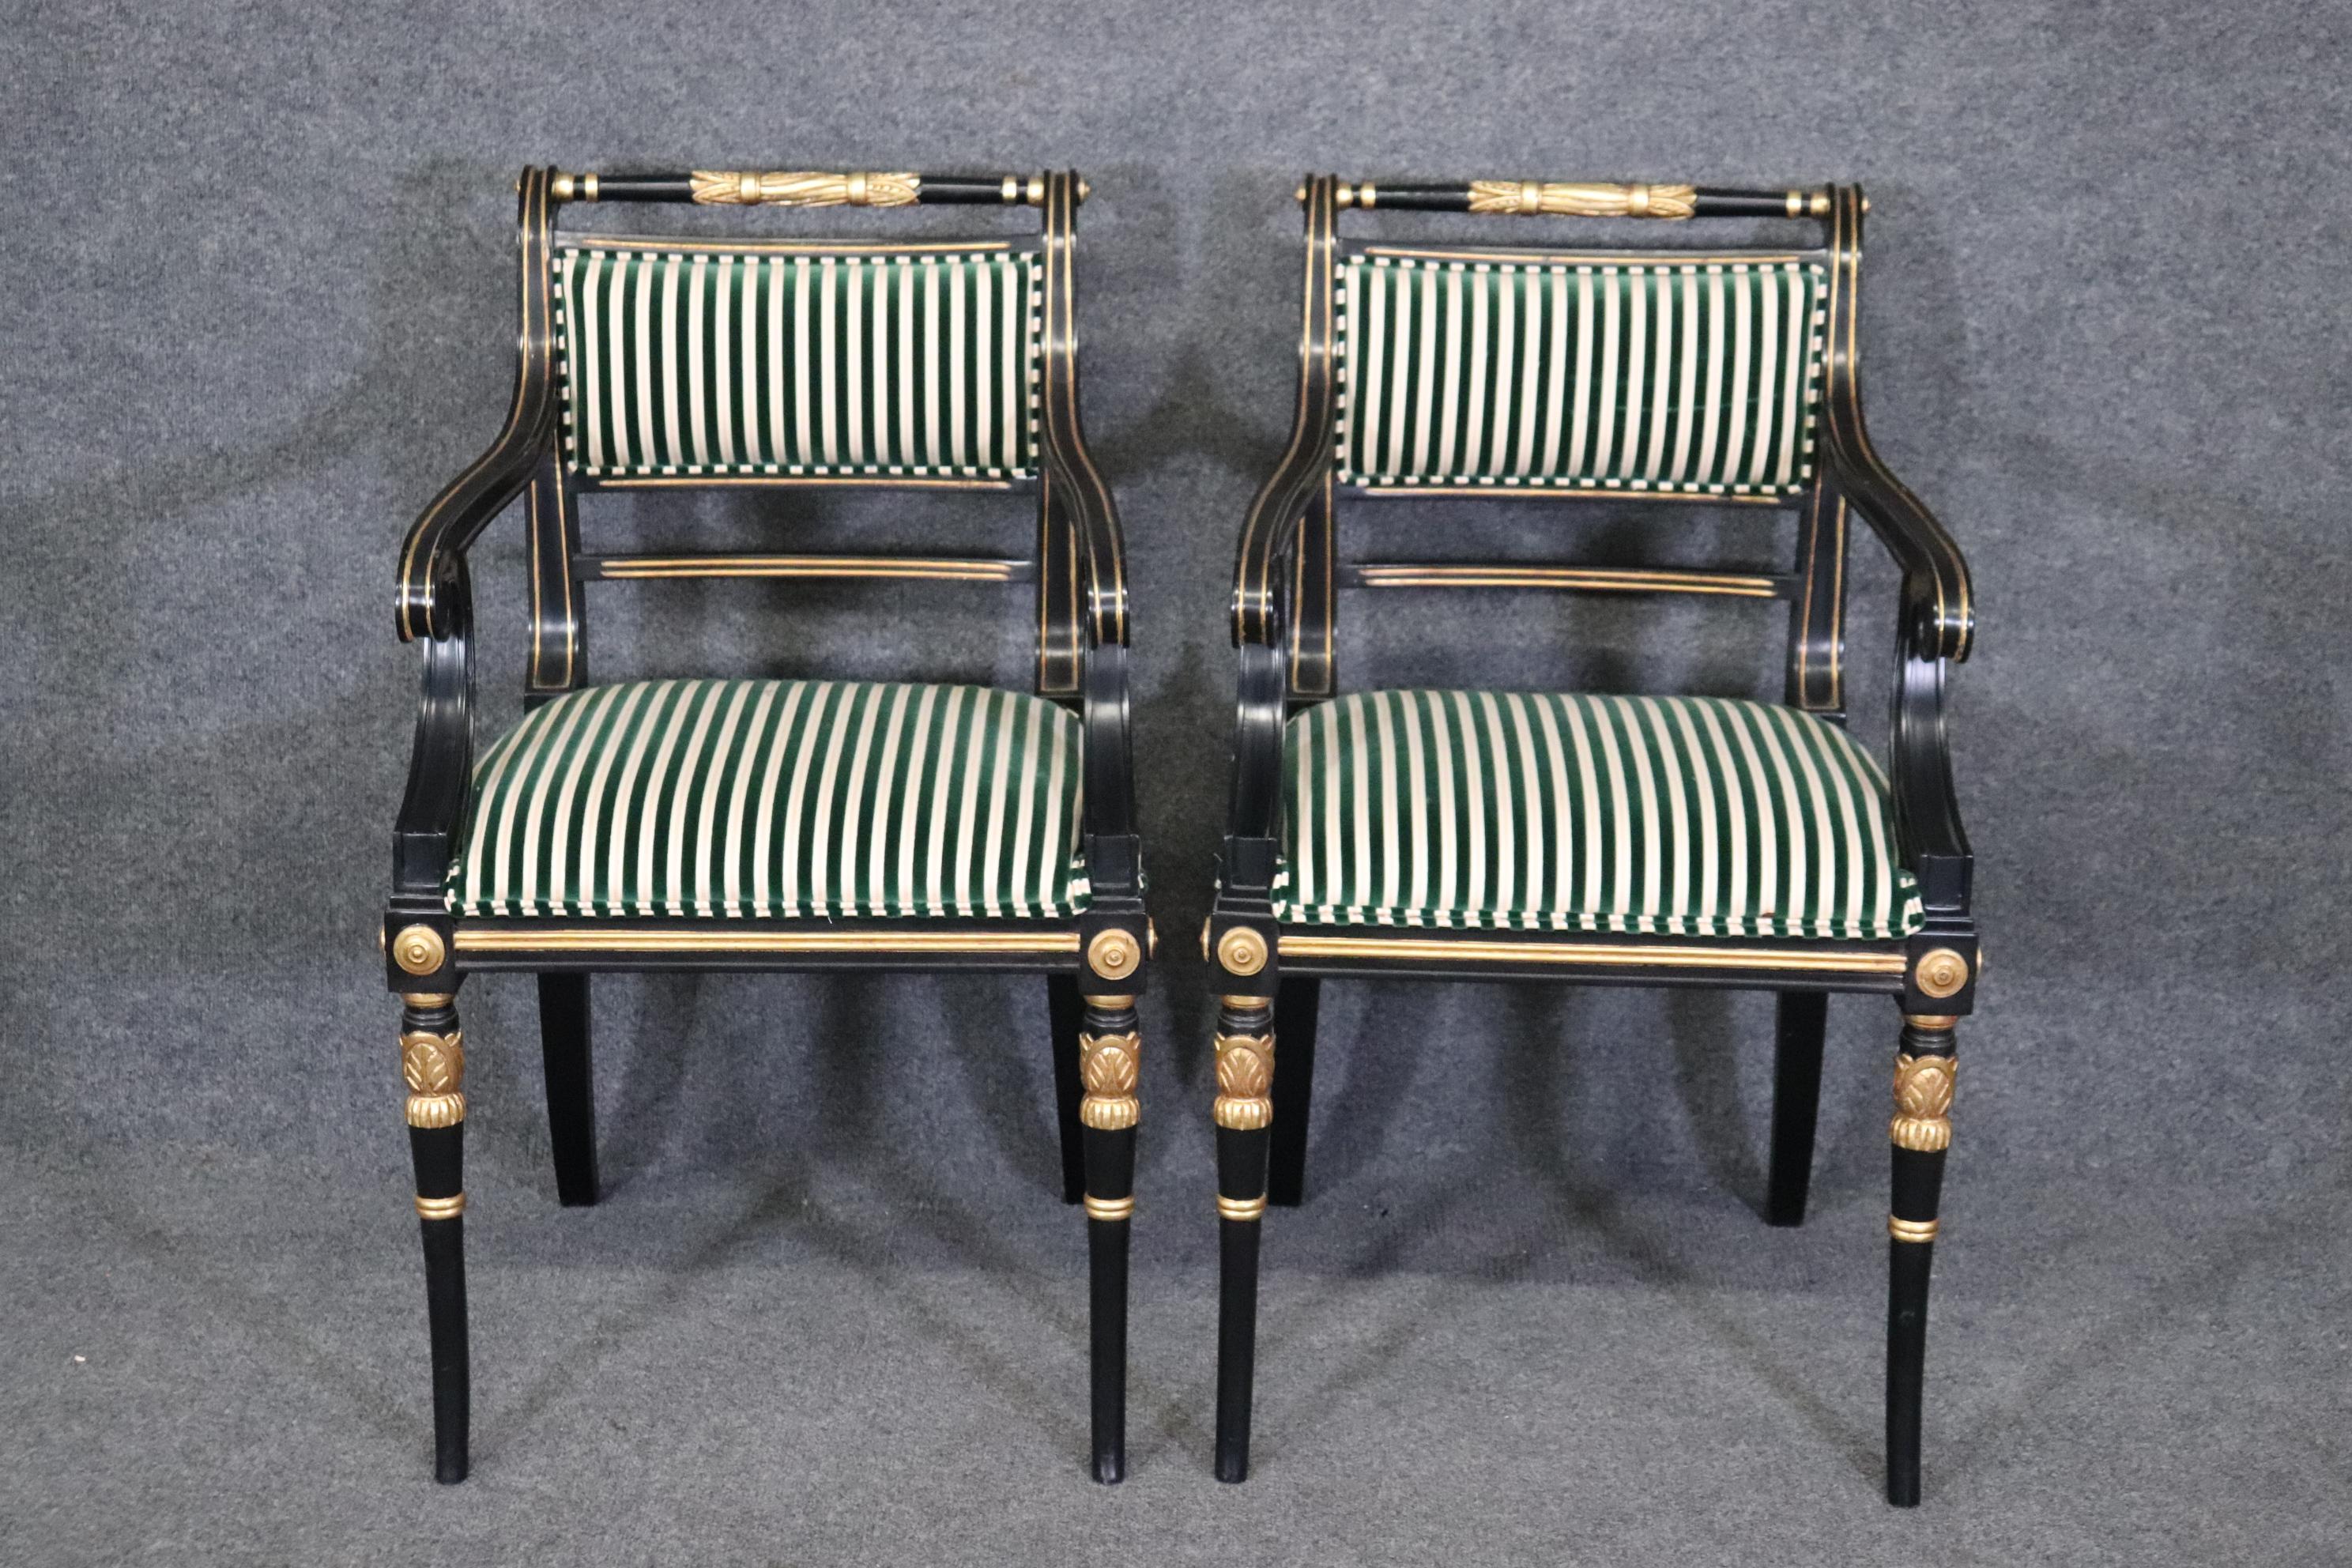 This is a gorgeous pair of head chairs for a dining table or possibly for a living room. The chairs are done in lustrous black lacquer and has gorgeous genuine gold leaf detailed carved areas for highlights. The chairs are in good condition and date